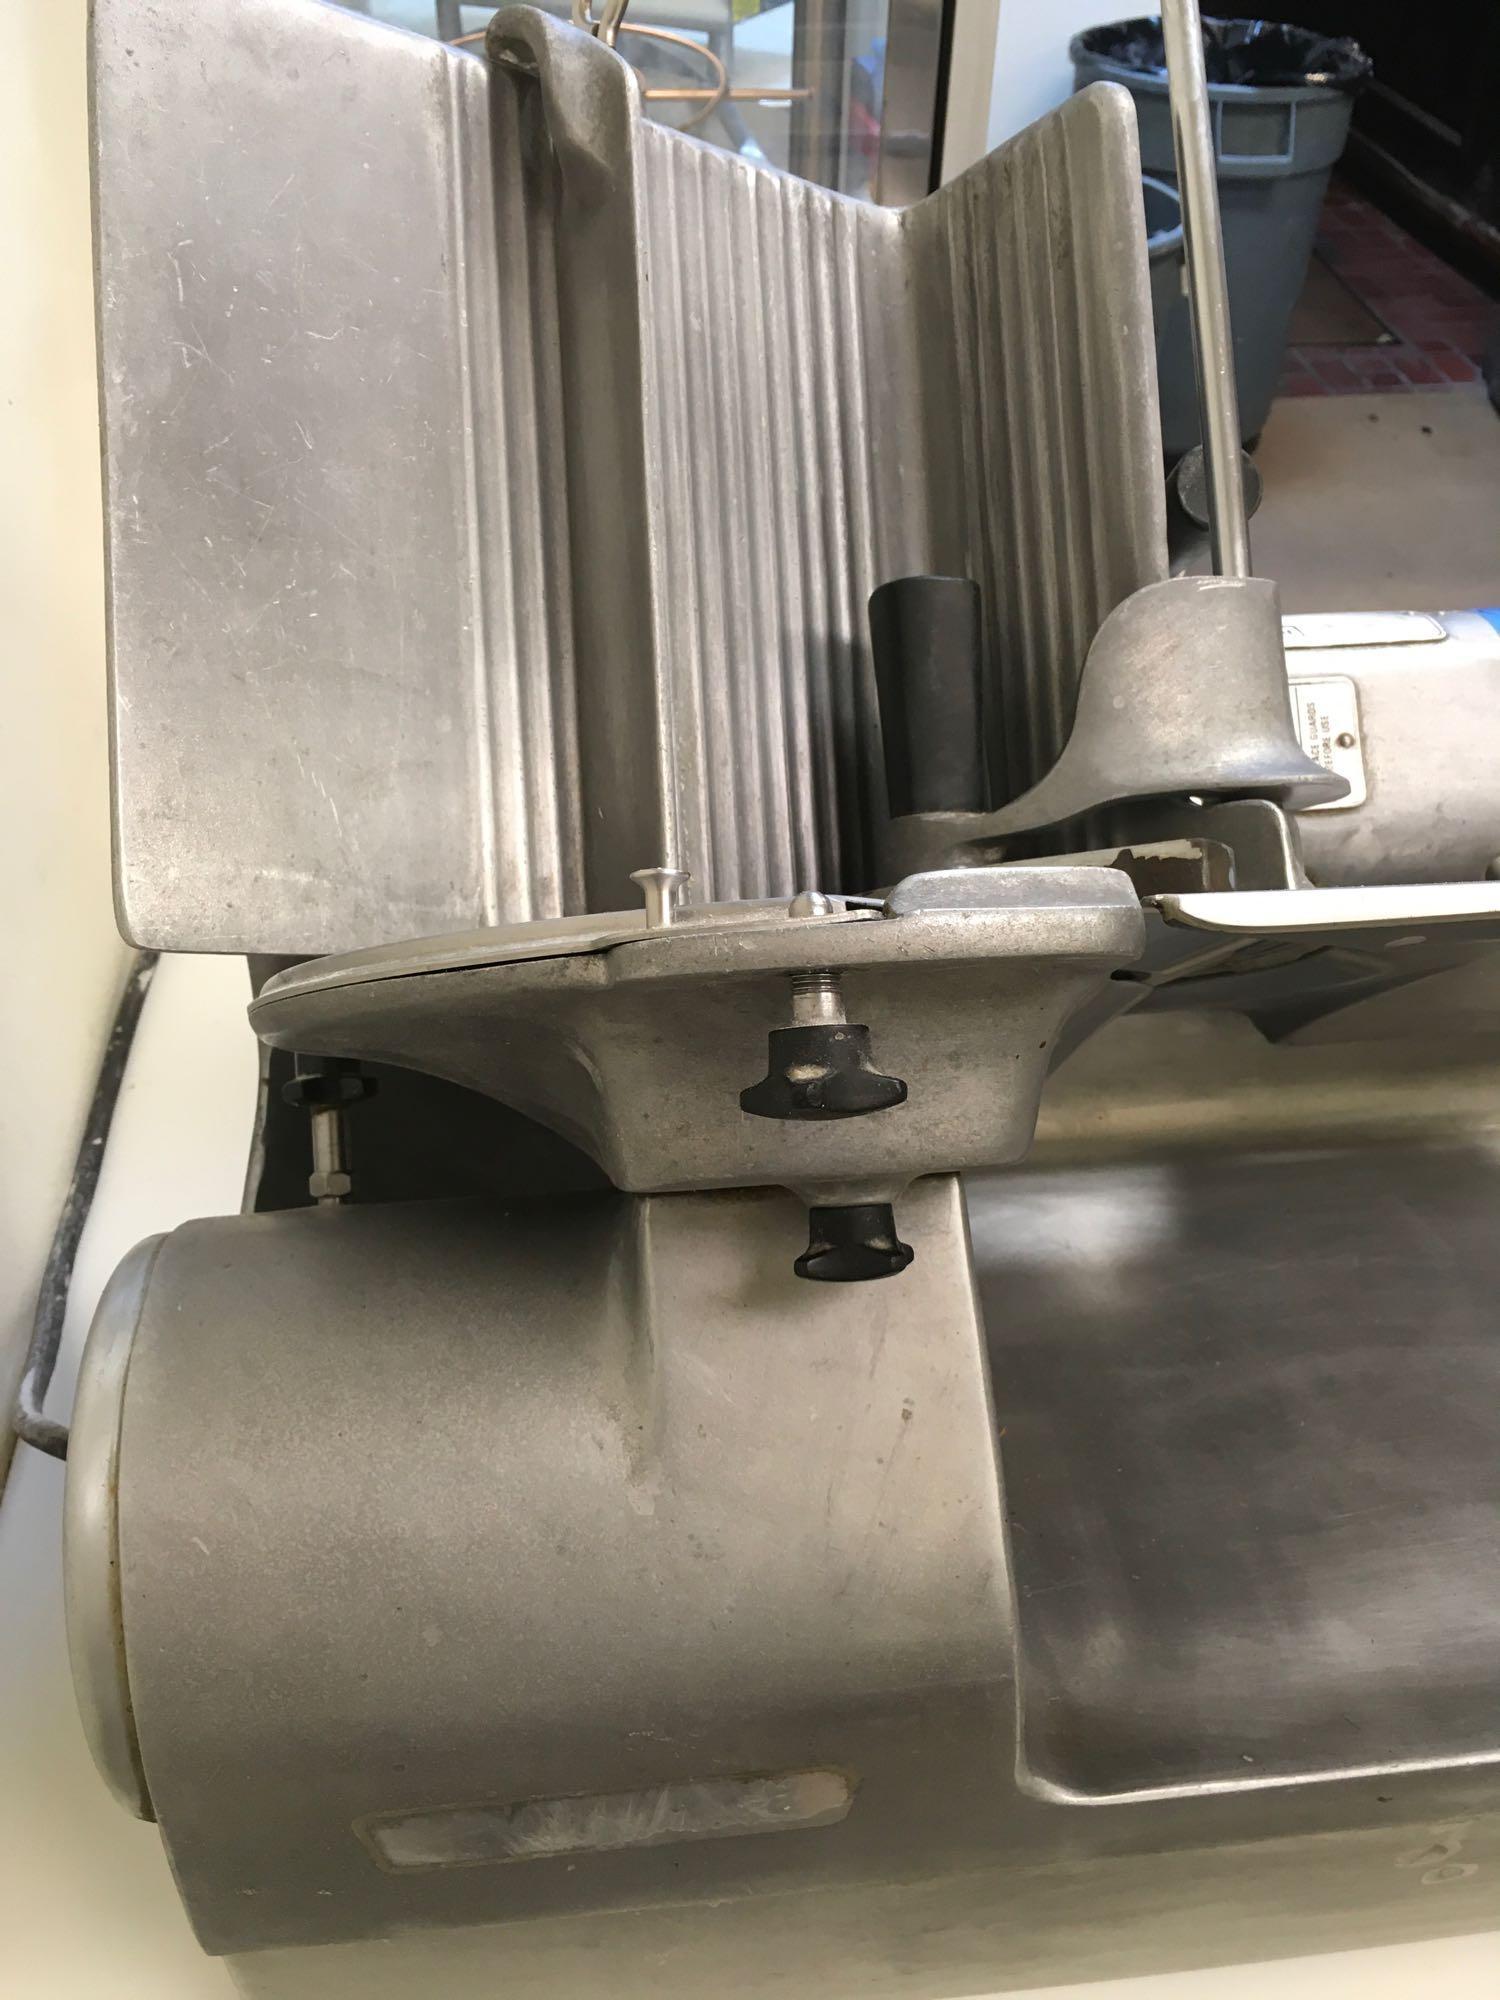 Hobart Slicer automatic, model 1712, 115 volts, works with veggie chute